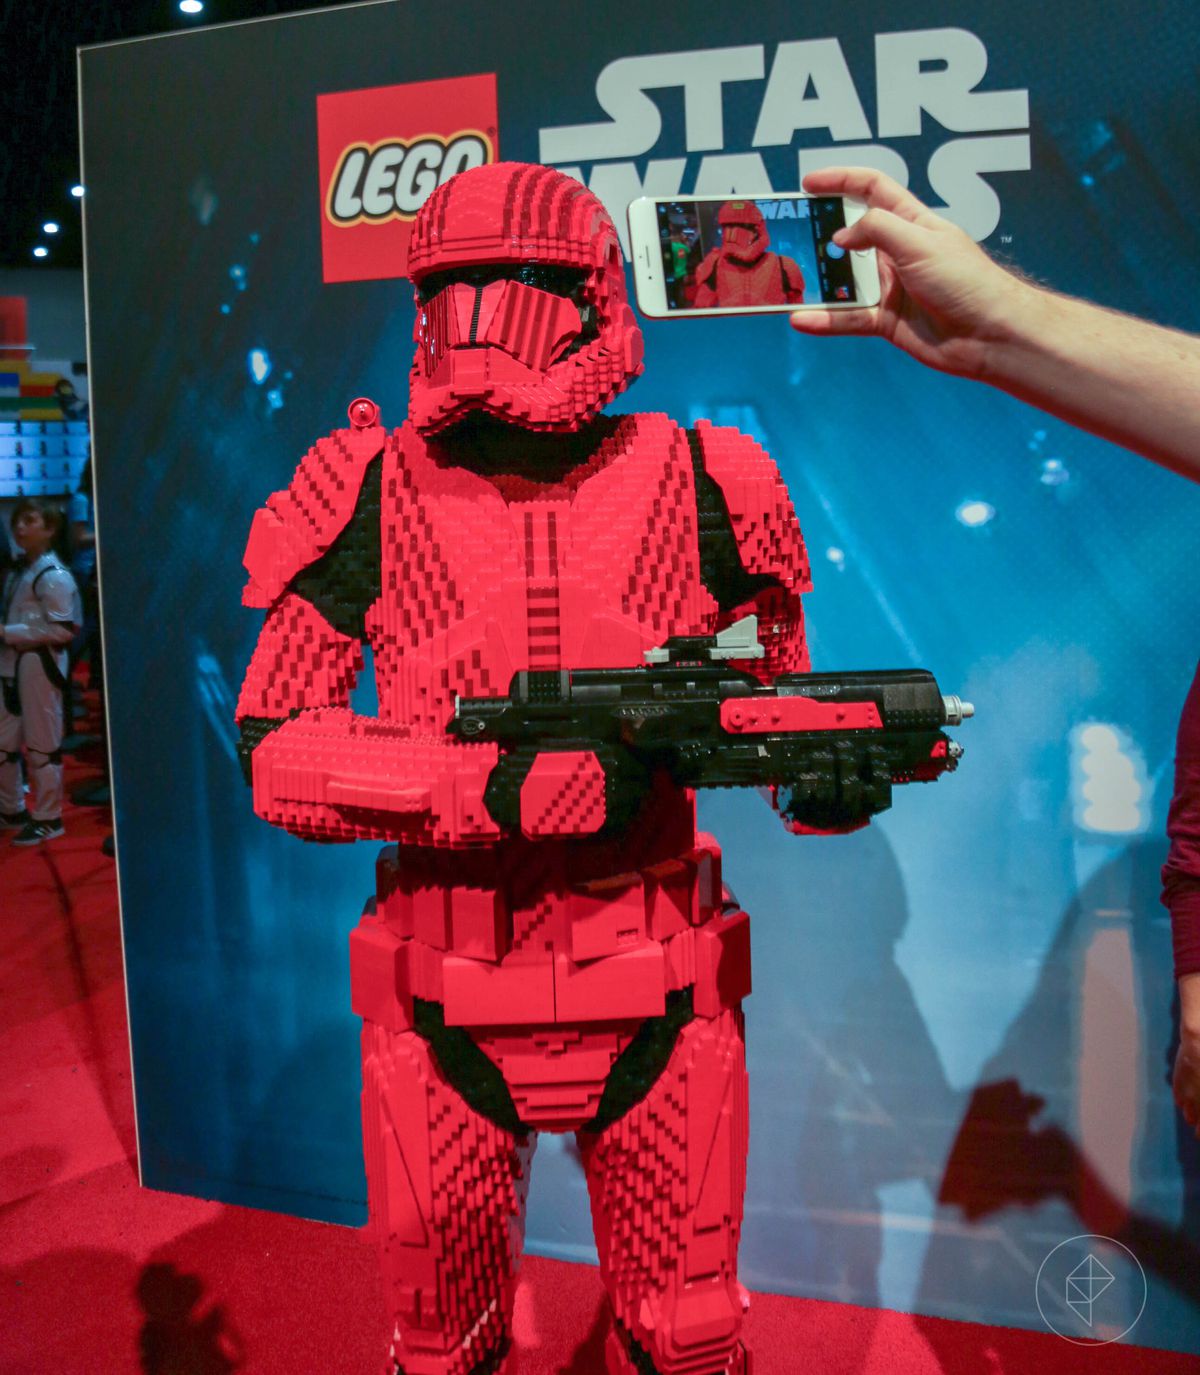 Star Wars STorm Troopers (including Sith Trooper) at San Diego Comic-Con 2019